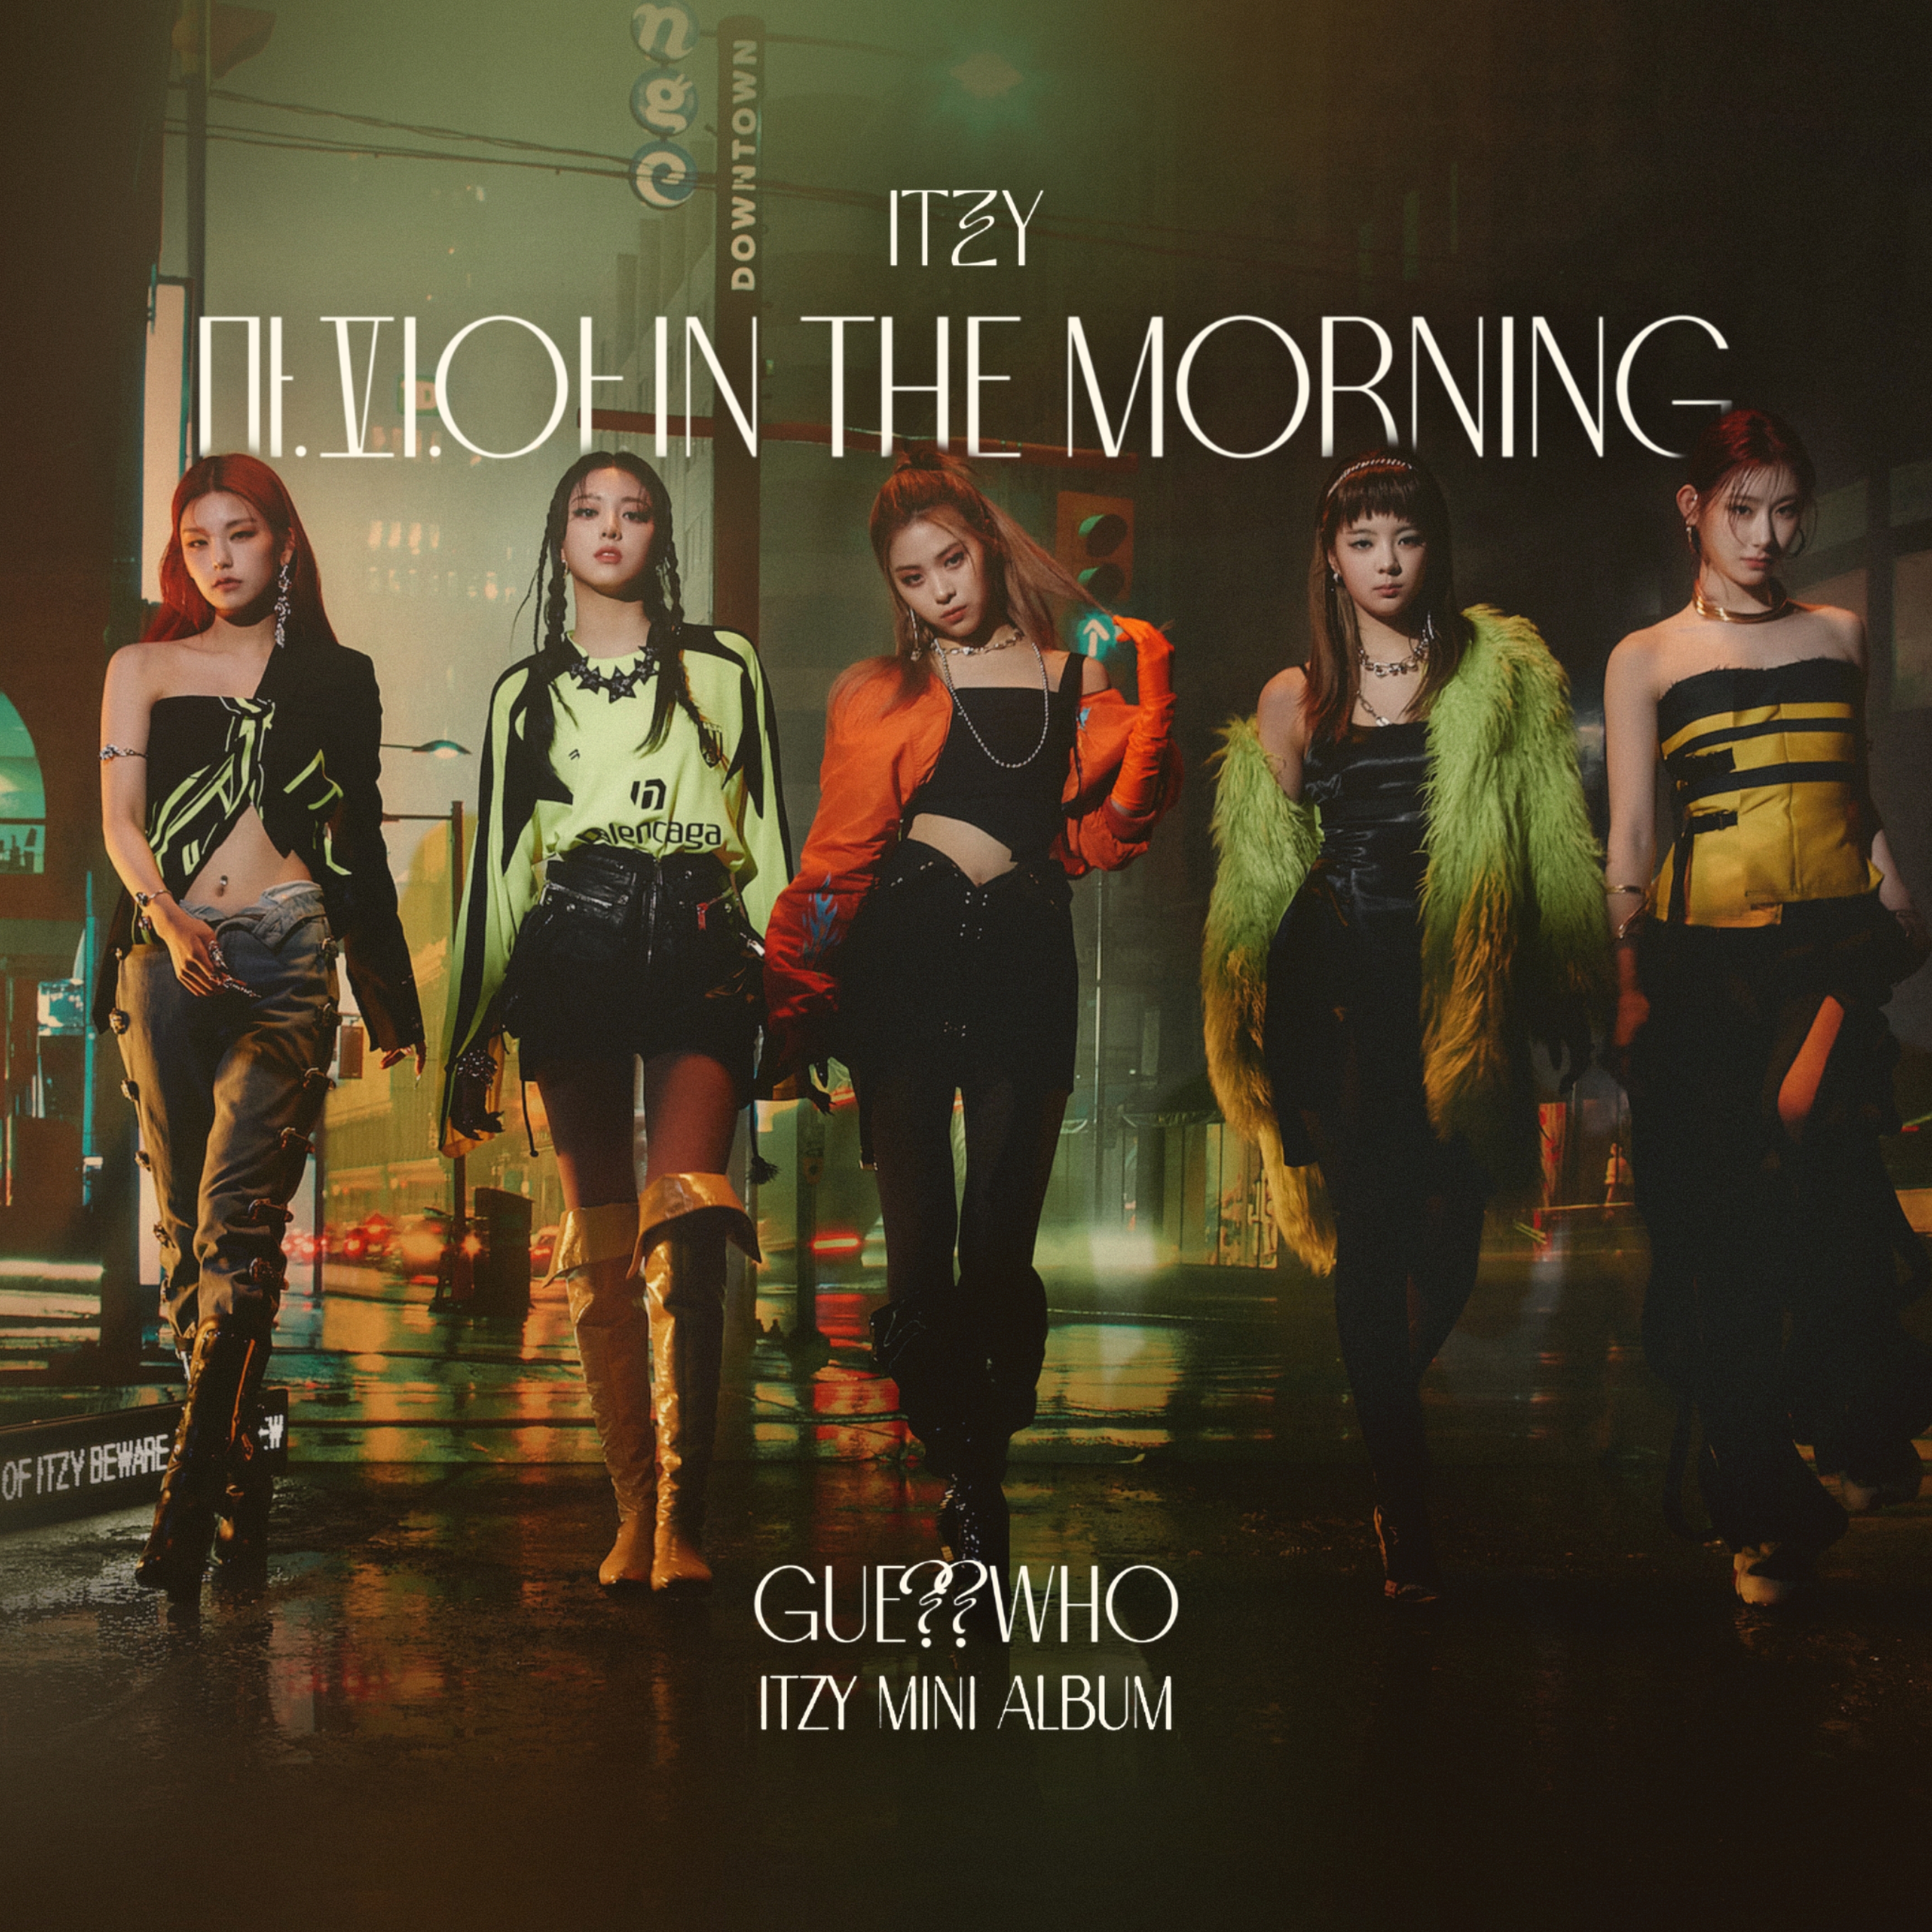 ITZY MAFIA IN THE MORNING / GUESS WHO cover by LEAlbum on DeviantArt